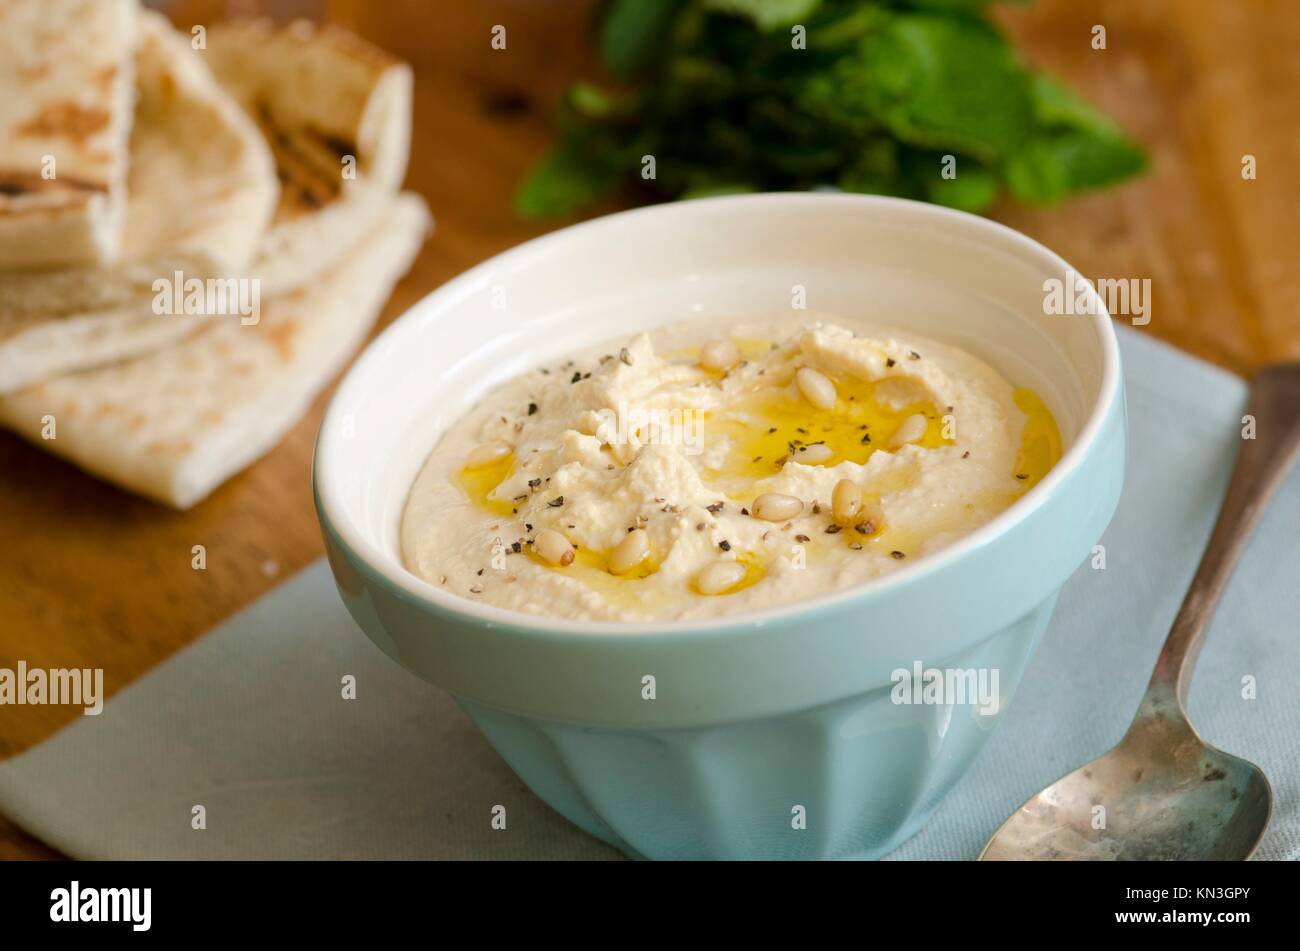 Healthy hummus with pine nuts and pita bread. Stock Photo